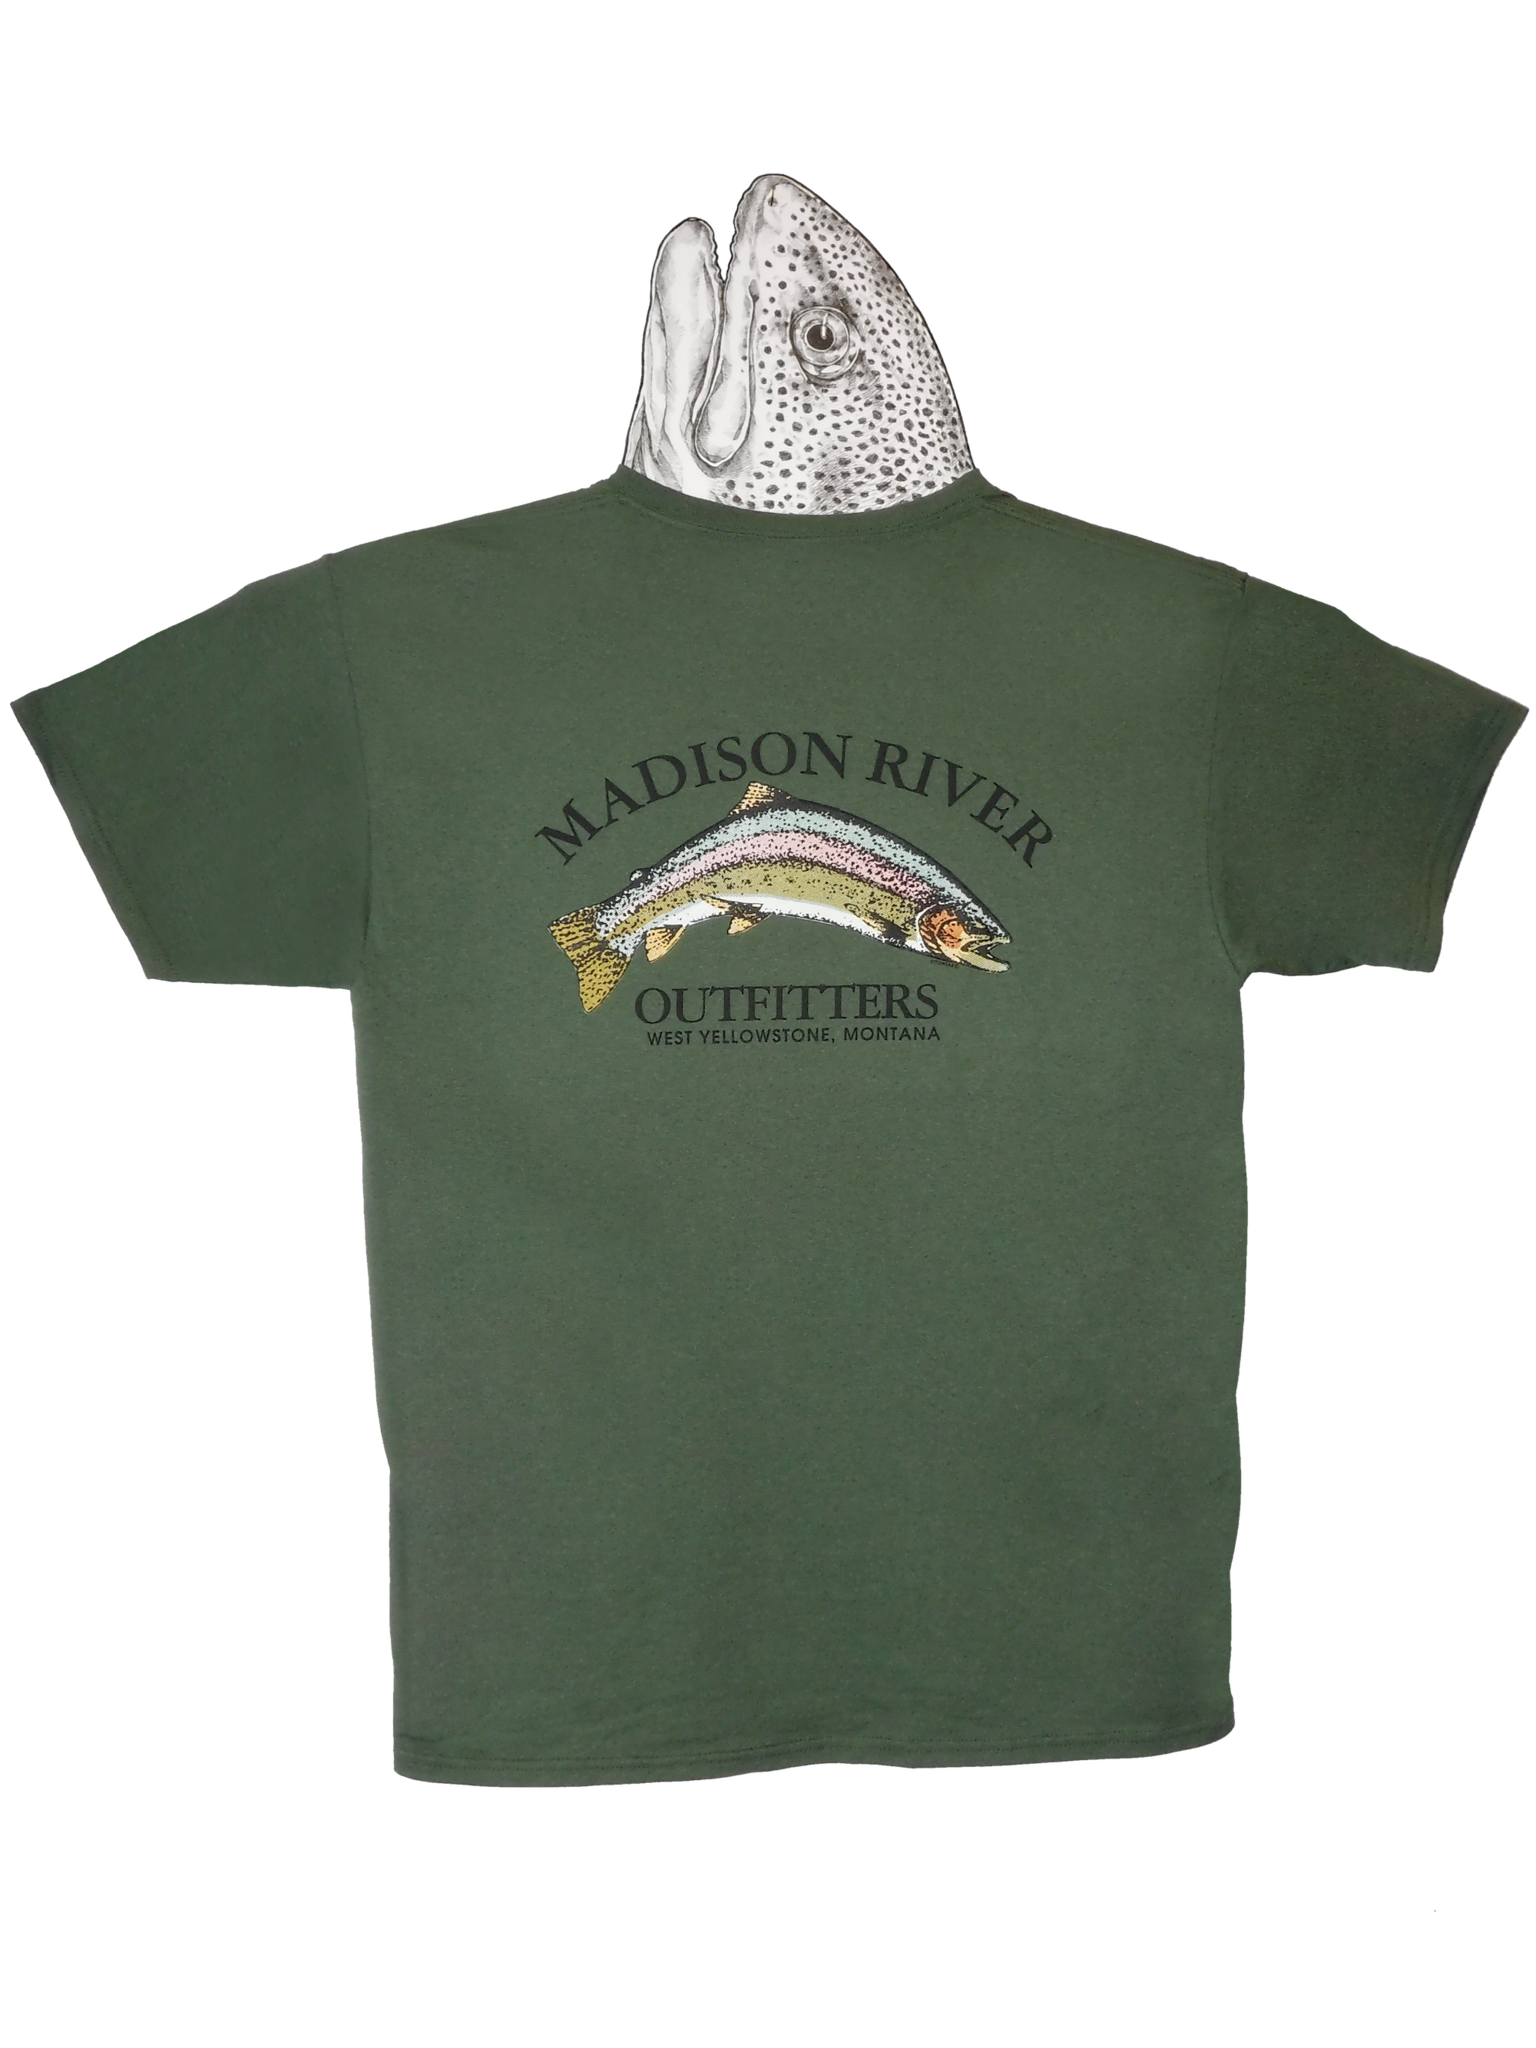 Men's Clothing - Madison River Outfitters